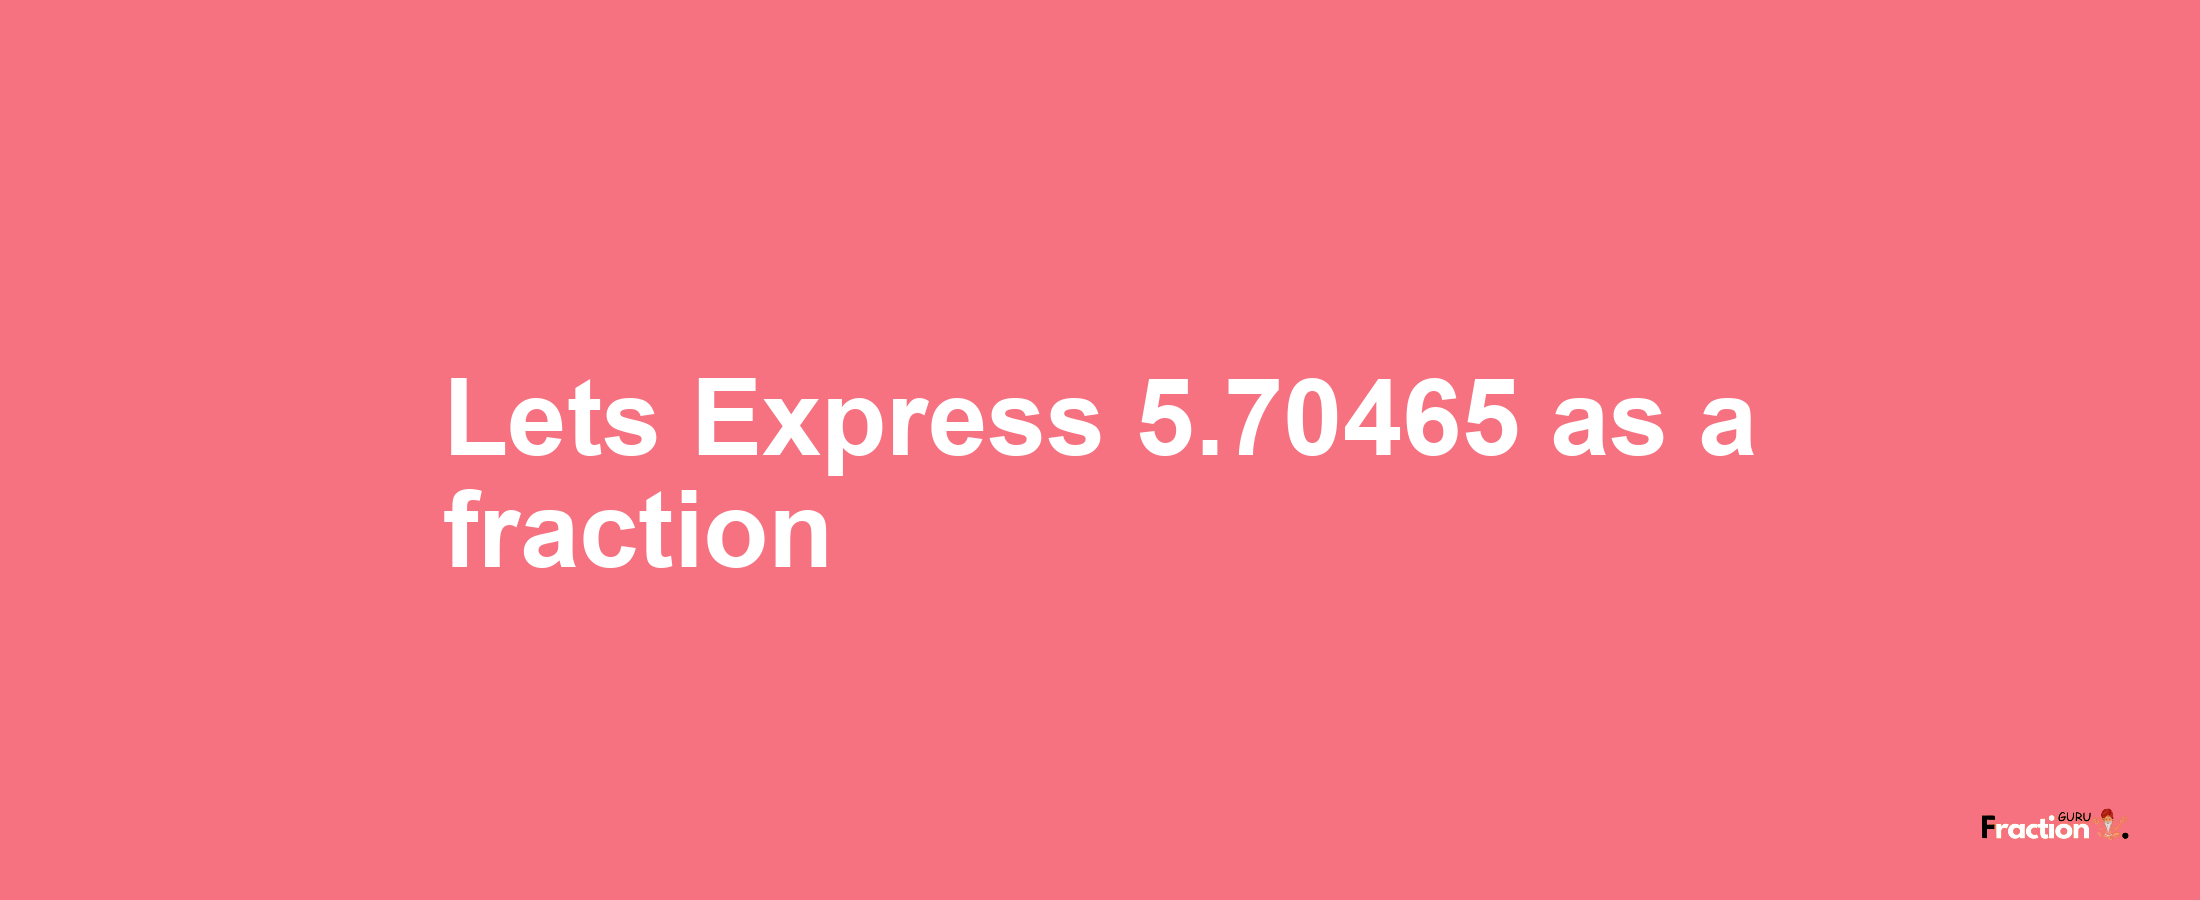 Lets Express 5.70465 as afraction